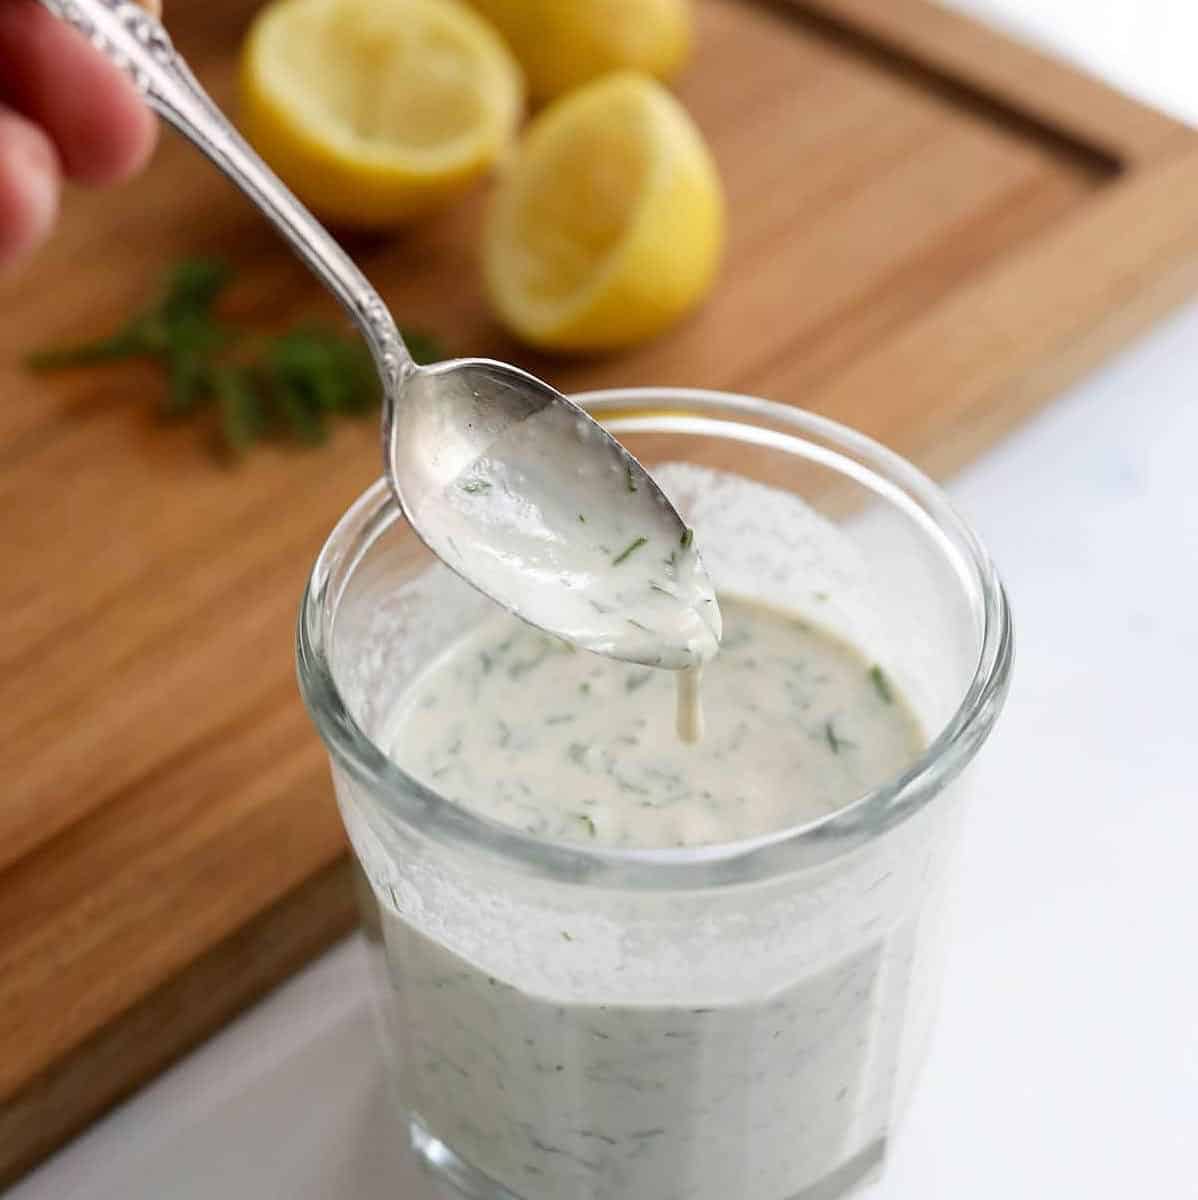  Creamy, dreamy and dairy-free. This is vegan dressing at its finest.